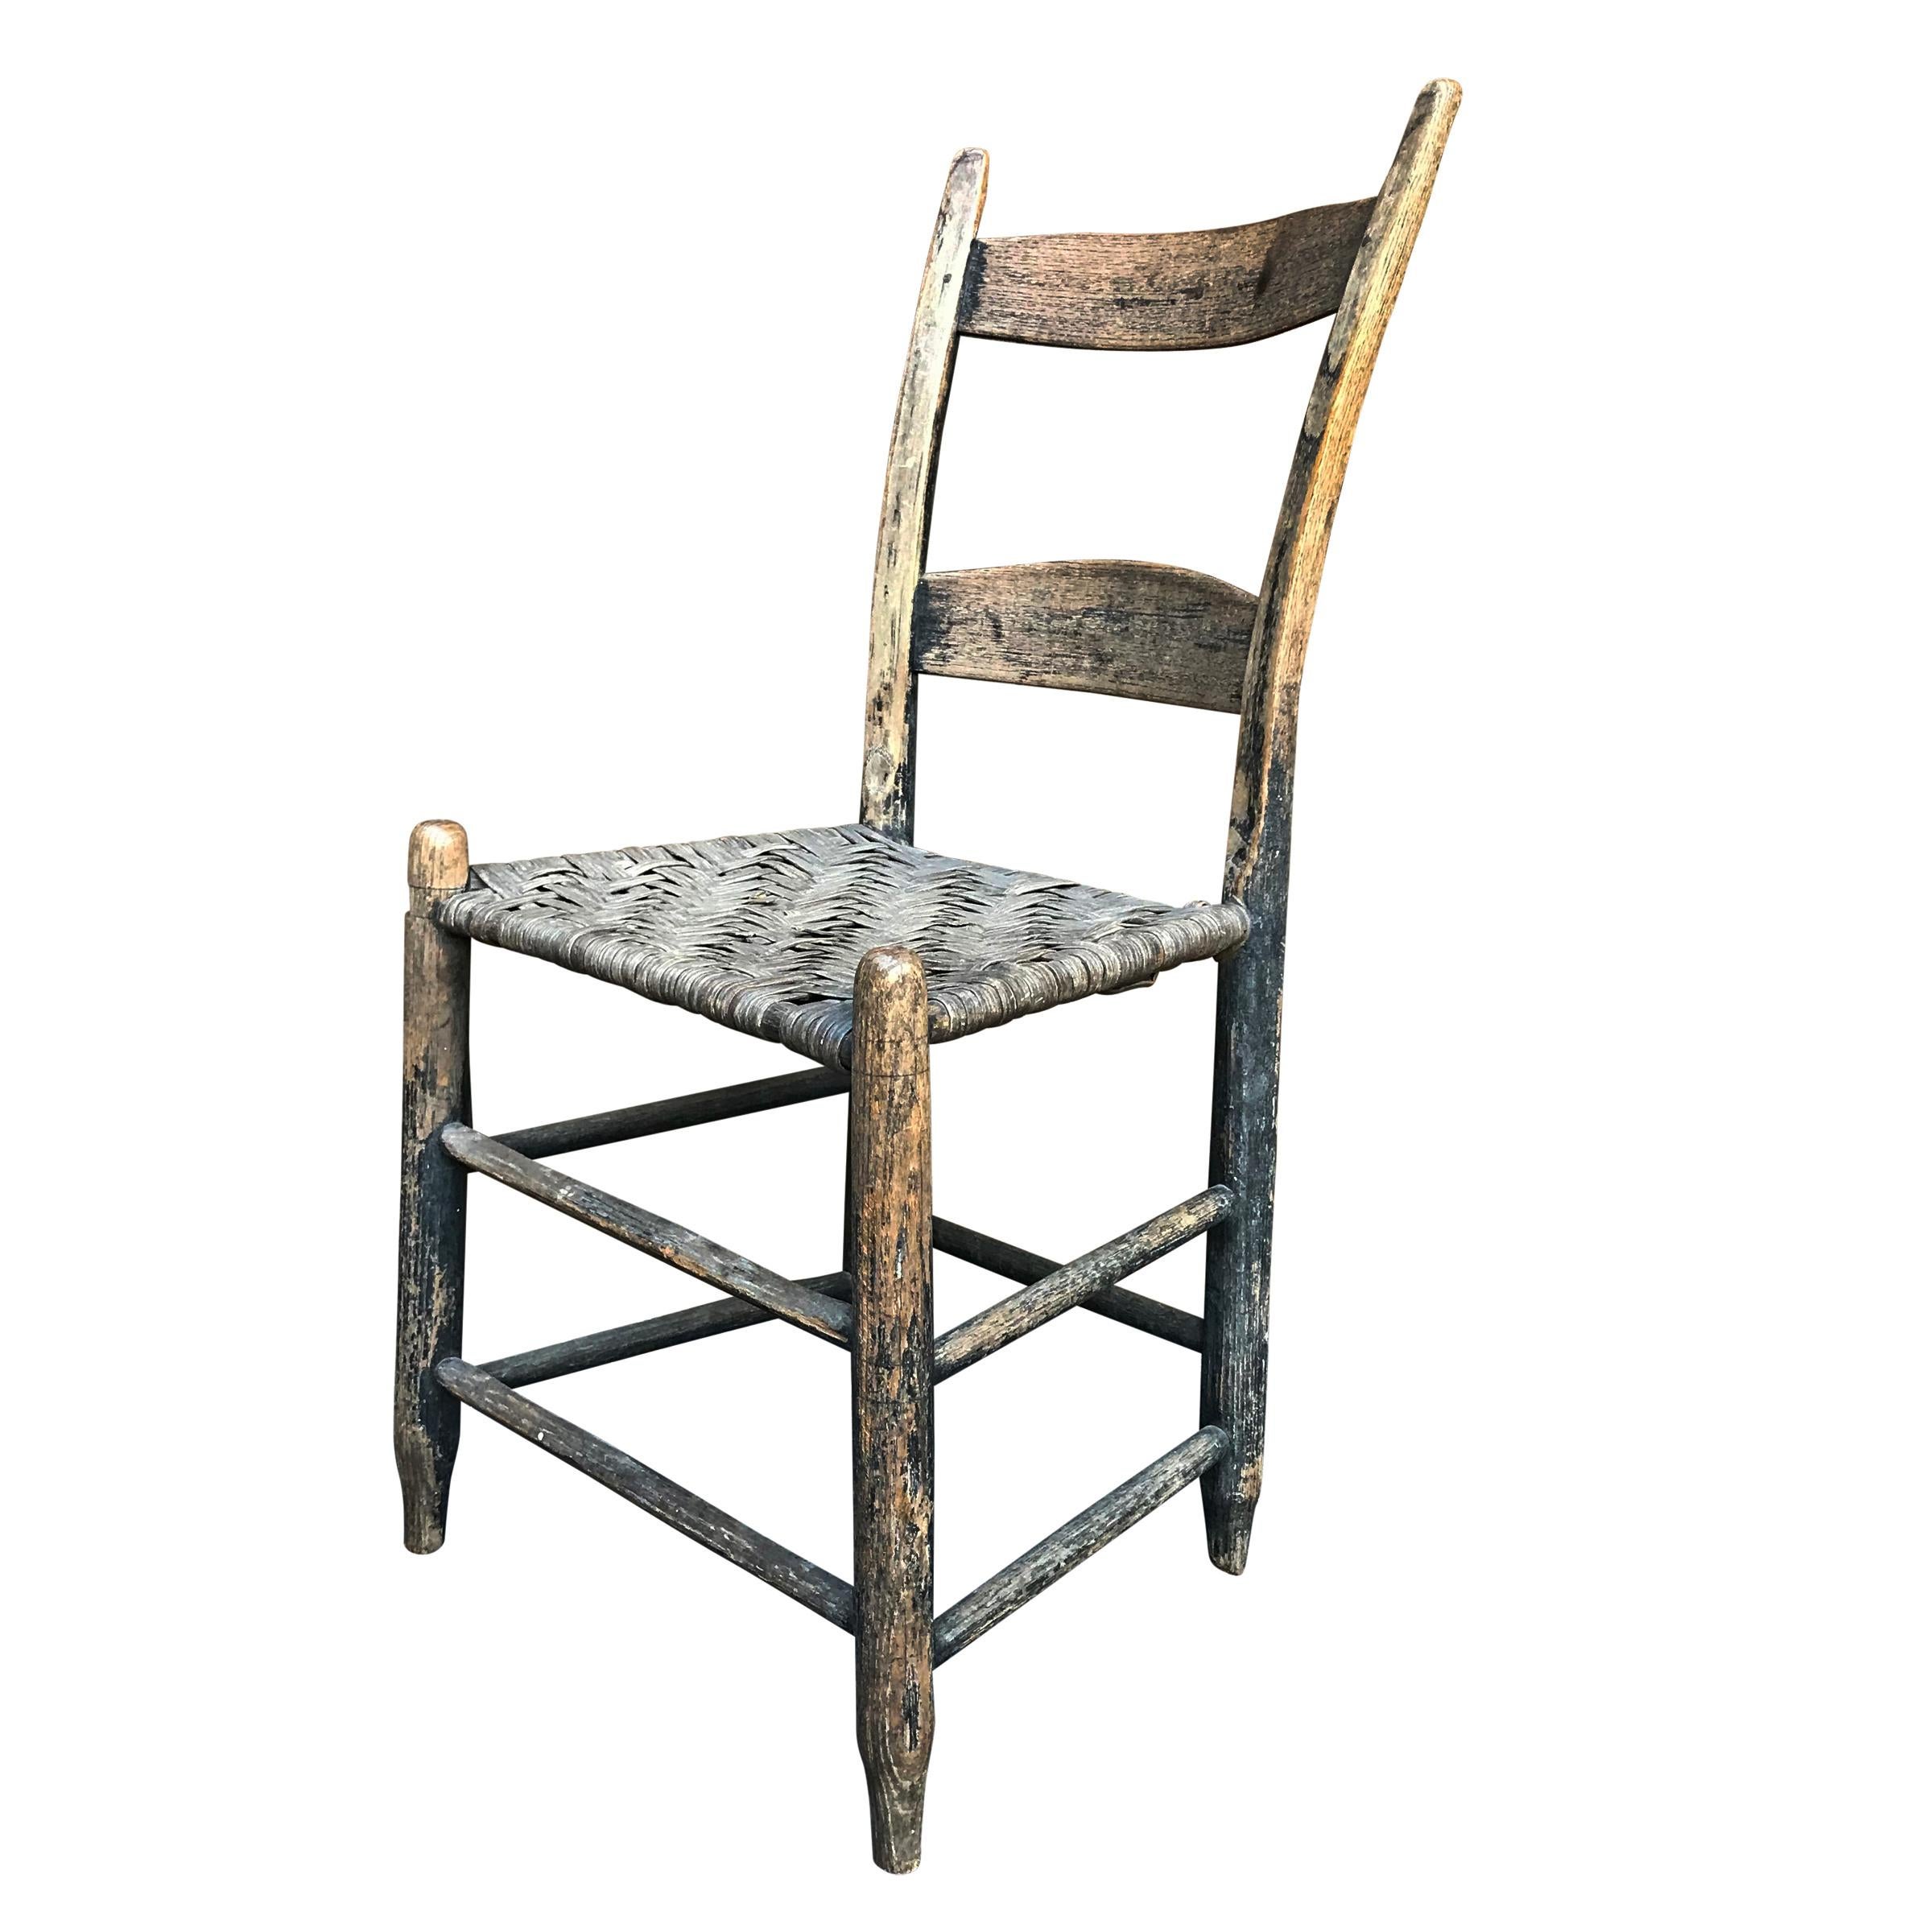 A wonderful 19th century American side chair with complex bent and curved back stiles, a woven splint seat, and the most perfect patina. The seat is very strong.